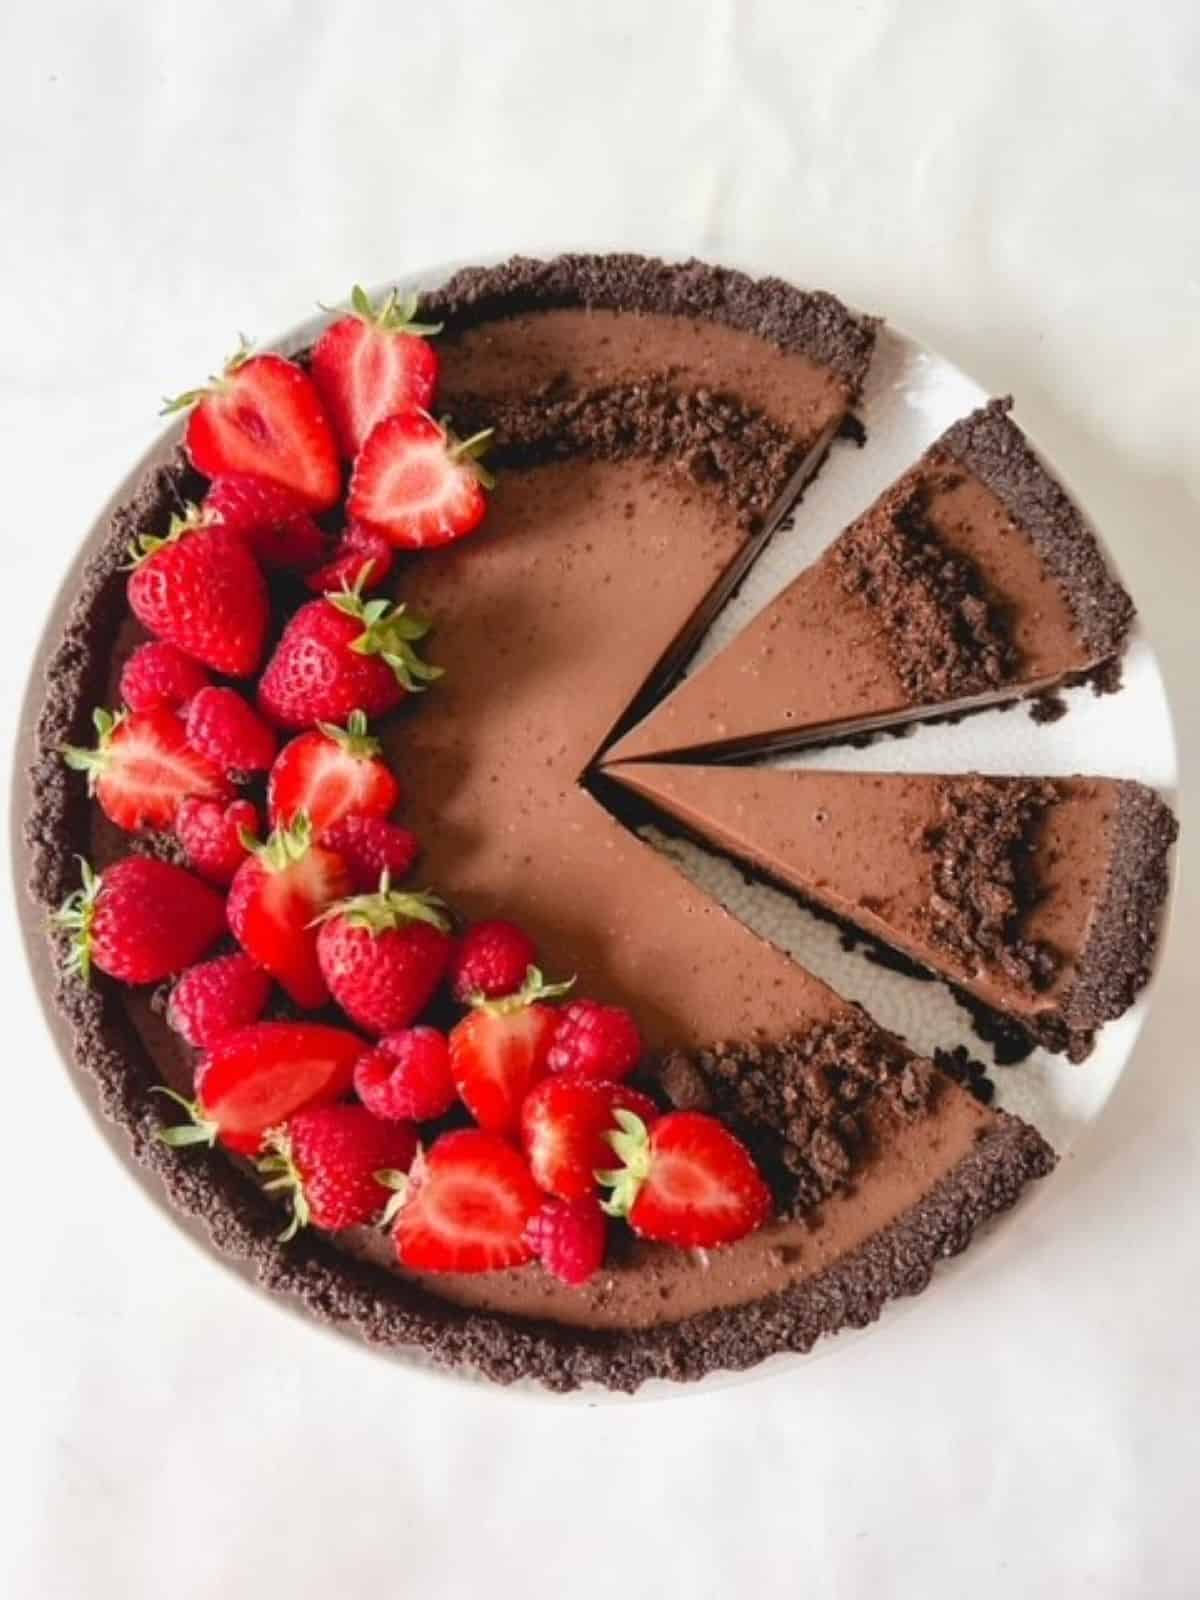 Oreo tart with strawberries on top with two slices cut out.